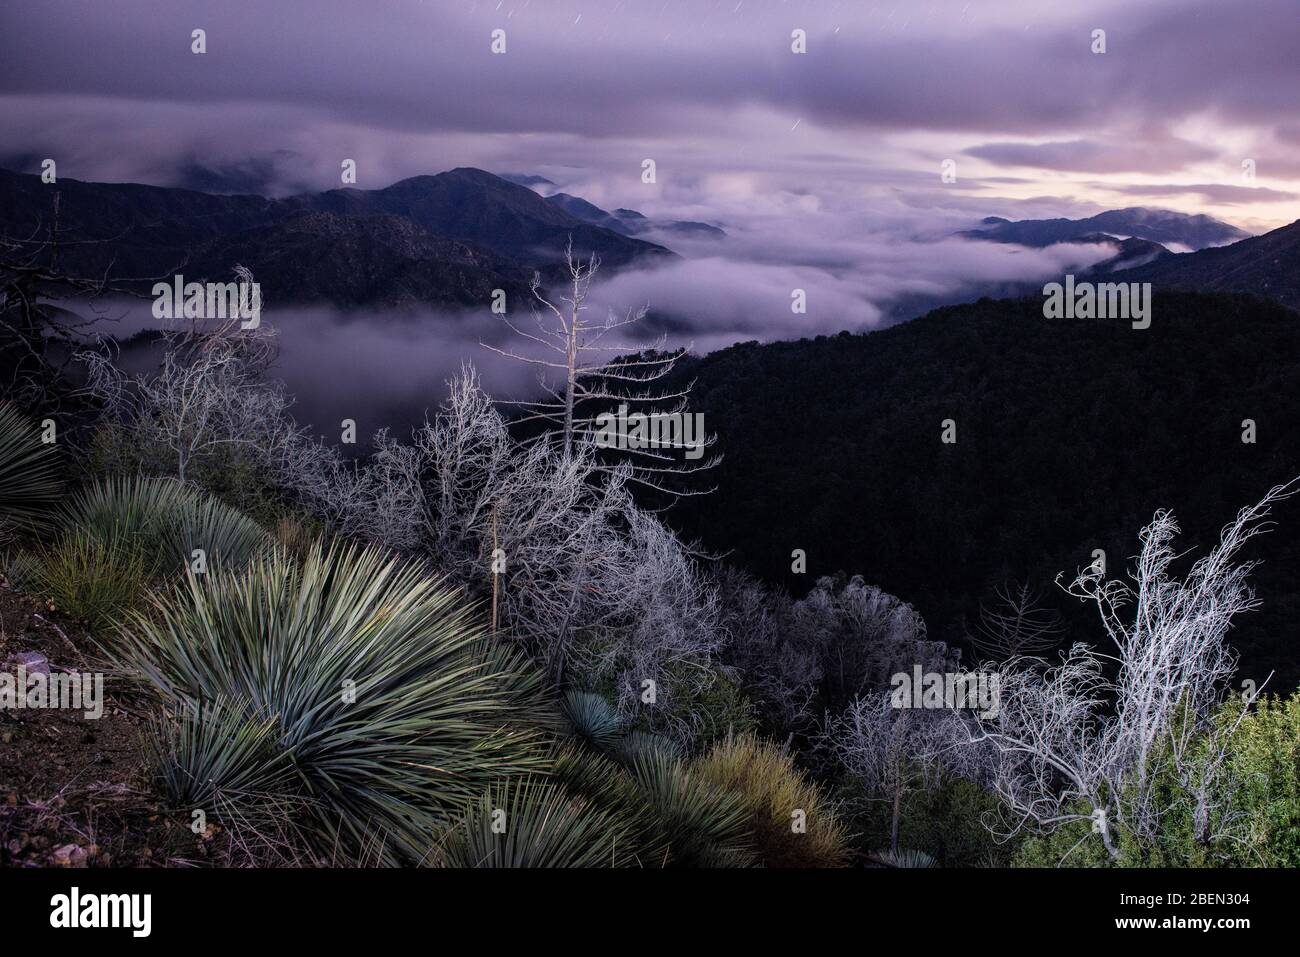 View on Mount Wilson Above Los Angeles Desert Plants and Foggy Night Stock Photo